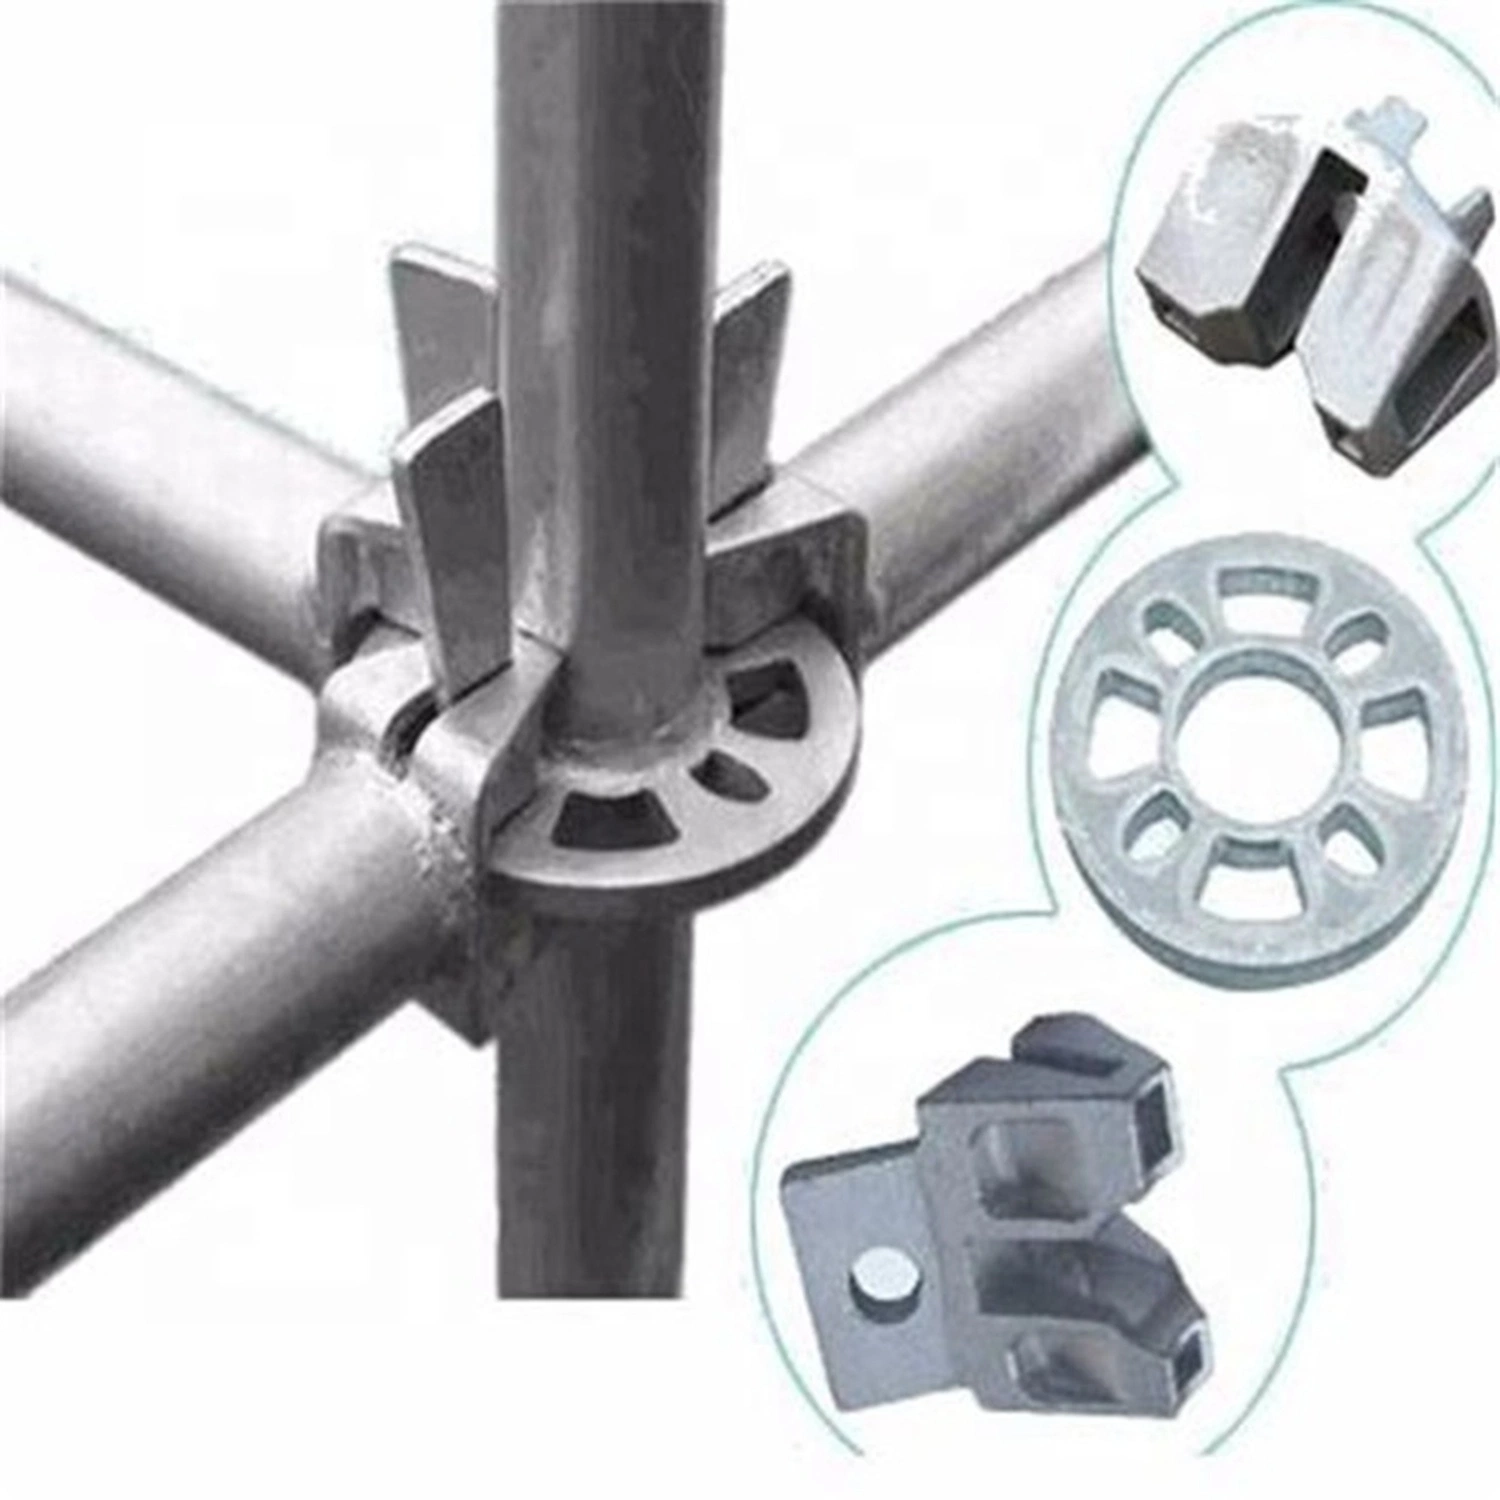 Construction Scaffold Components Layher Verticals/Standards Scaffolding Accessories